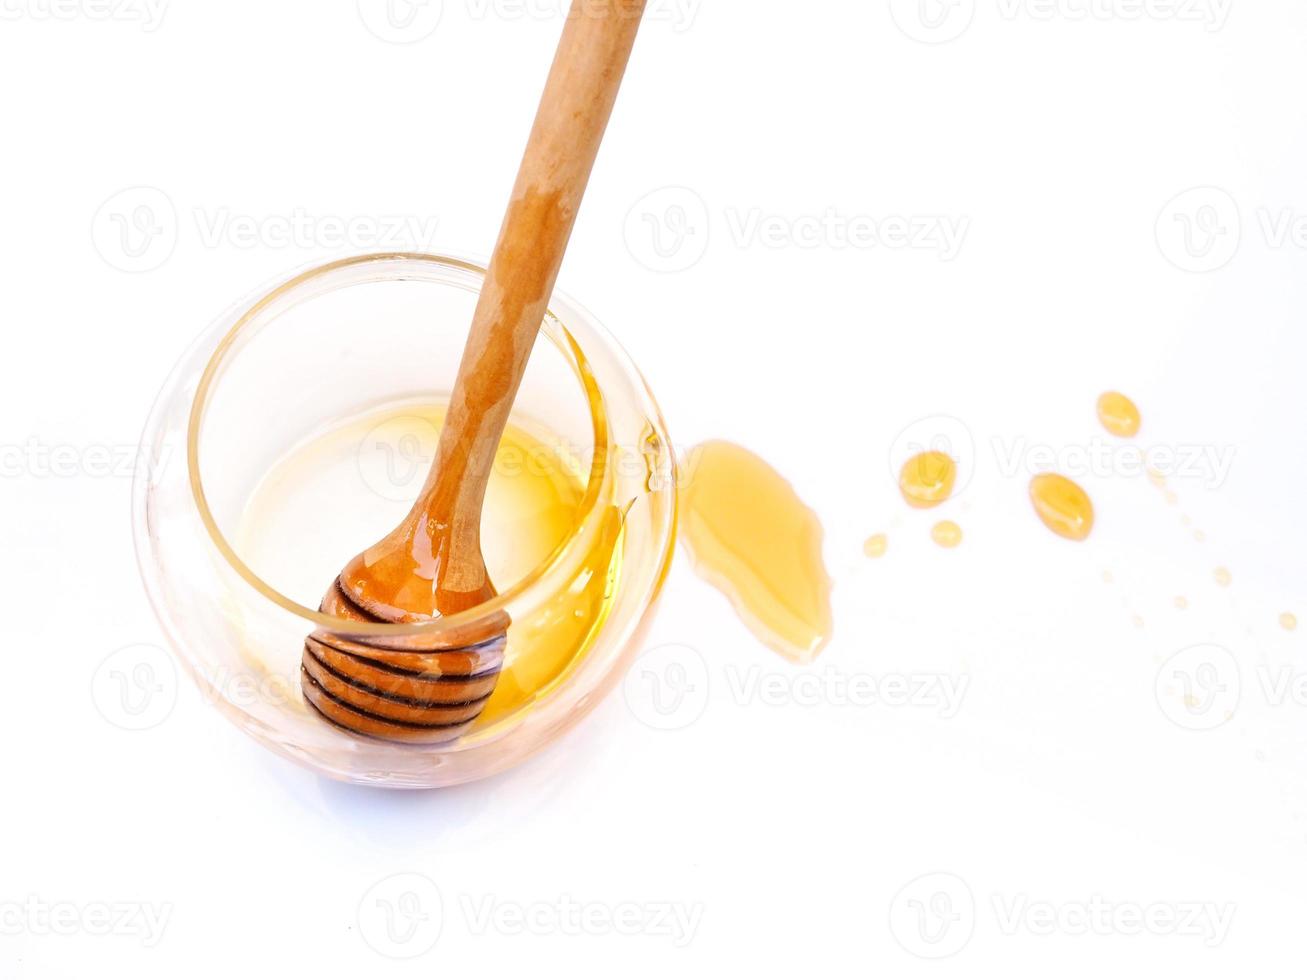 Top view of honey stick in empty honey glass jar with stain of honey isolated on white background. photo